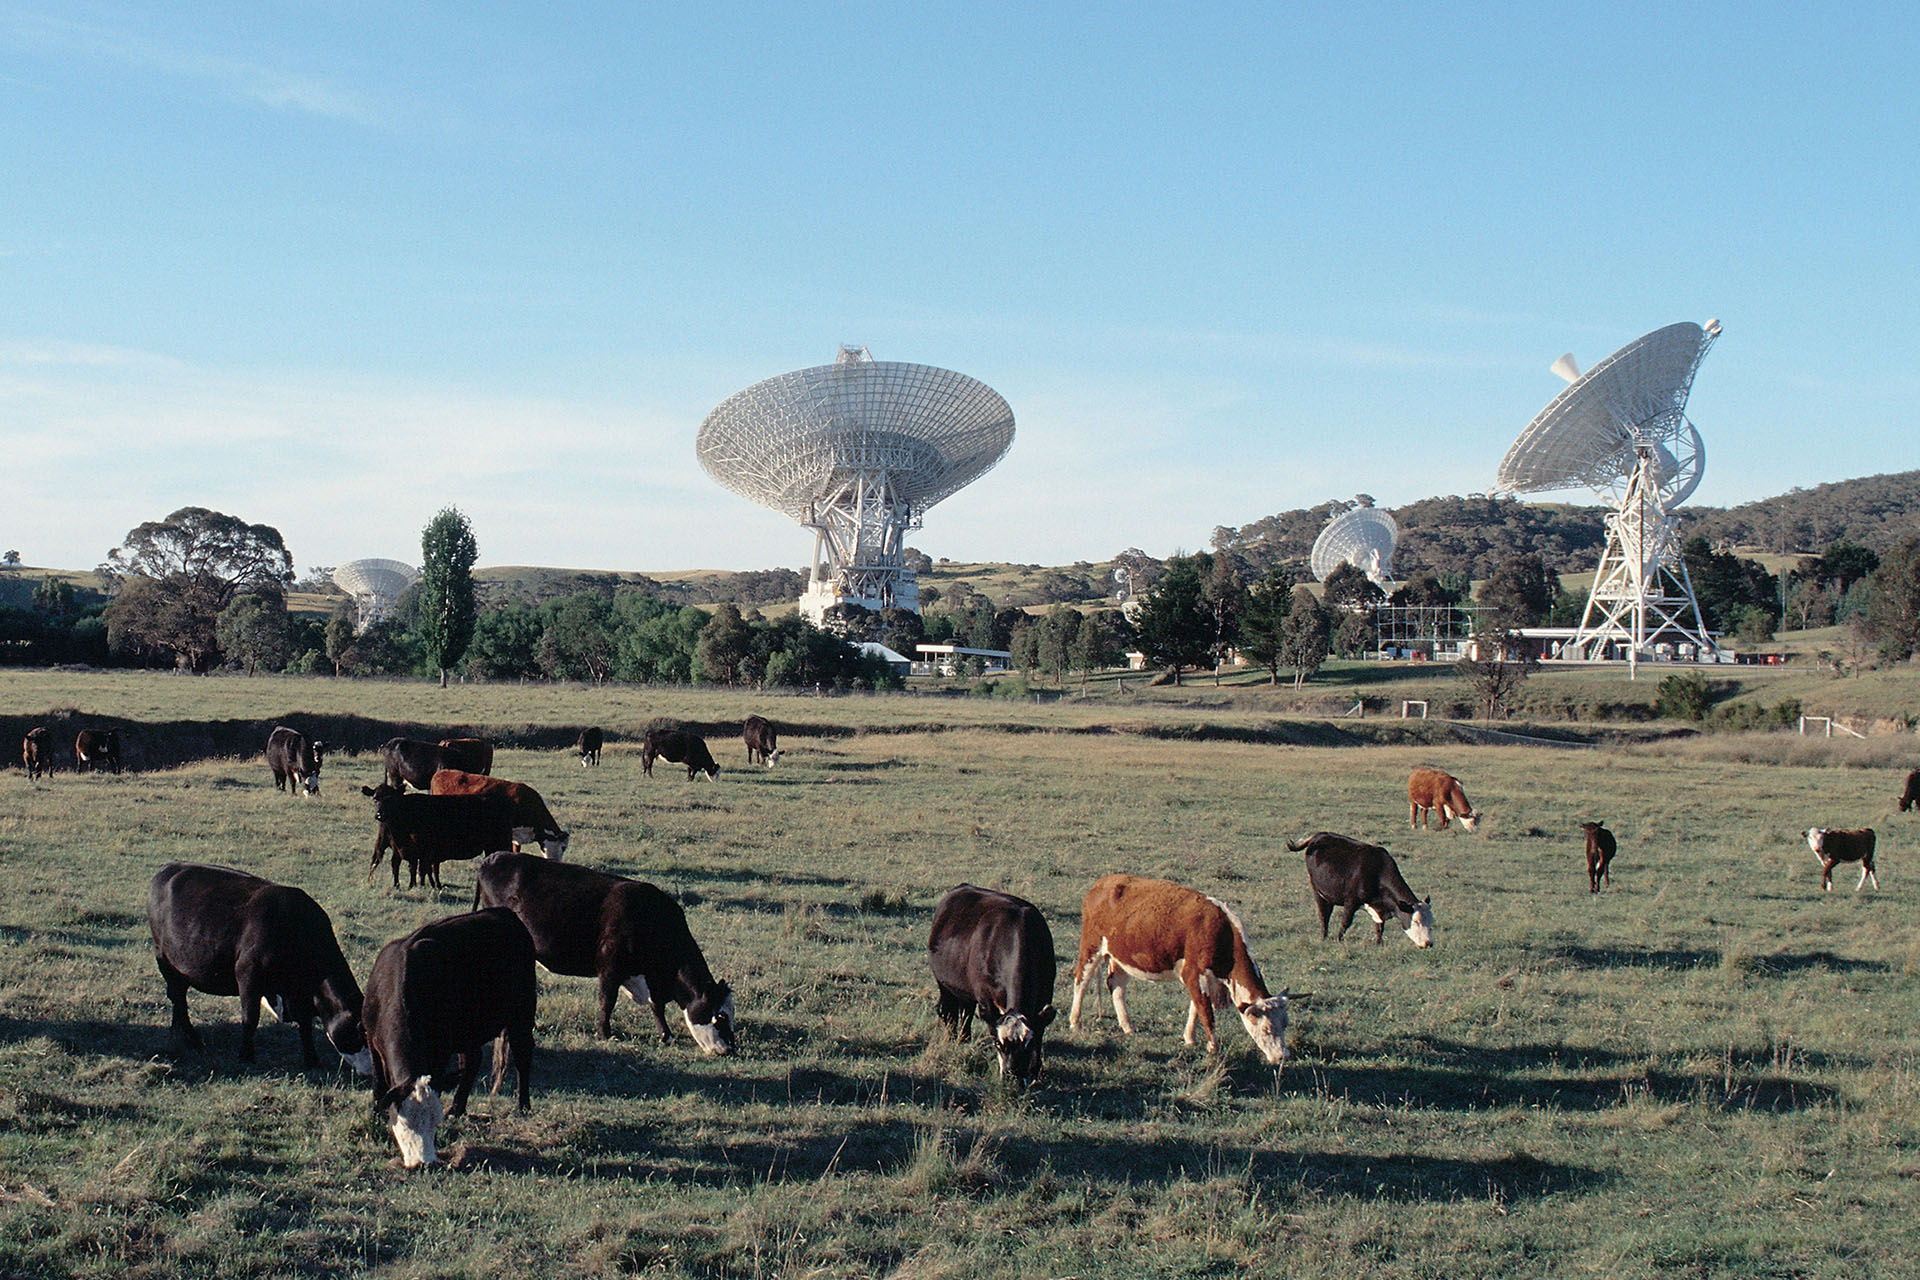 Got a passion for space? Canberra Deep Space Communication Complex wants you